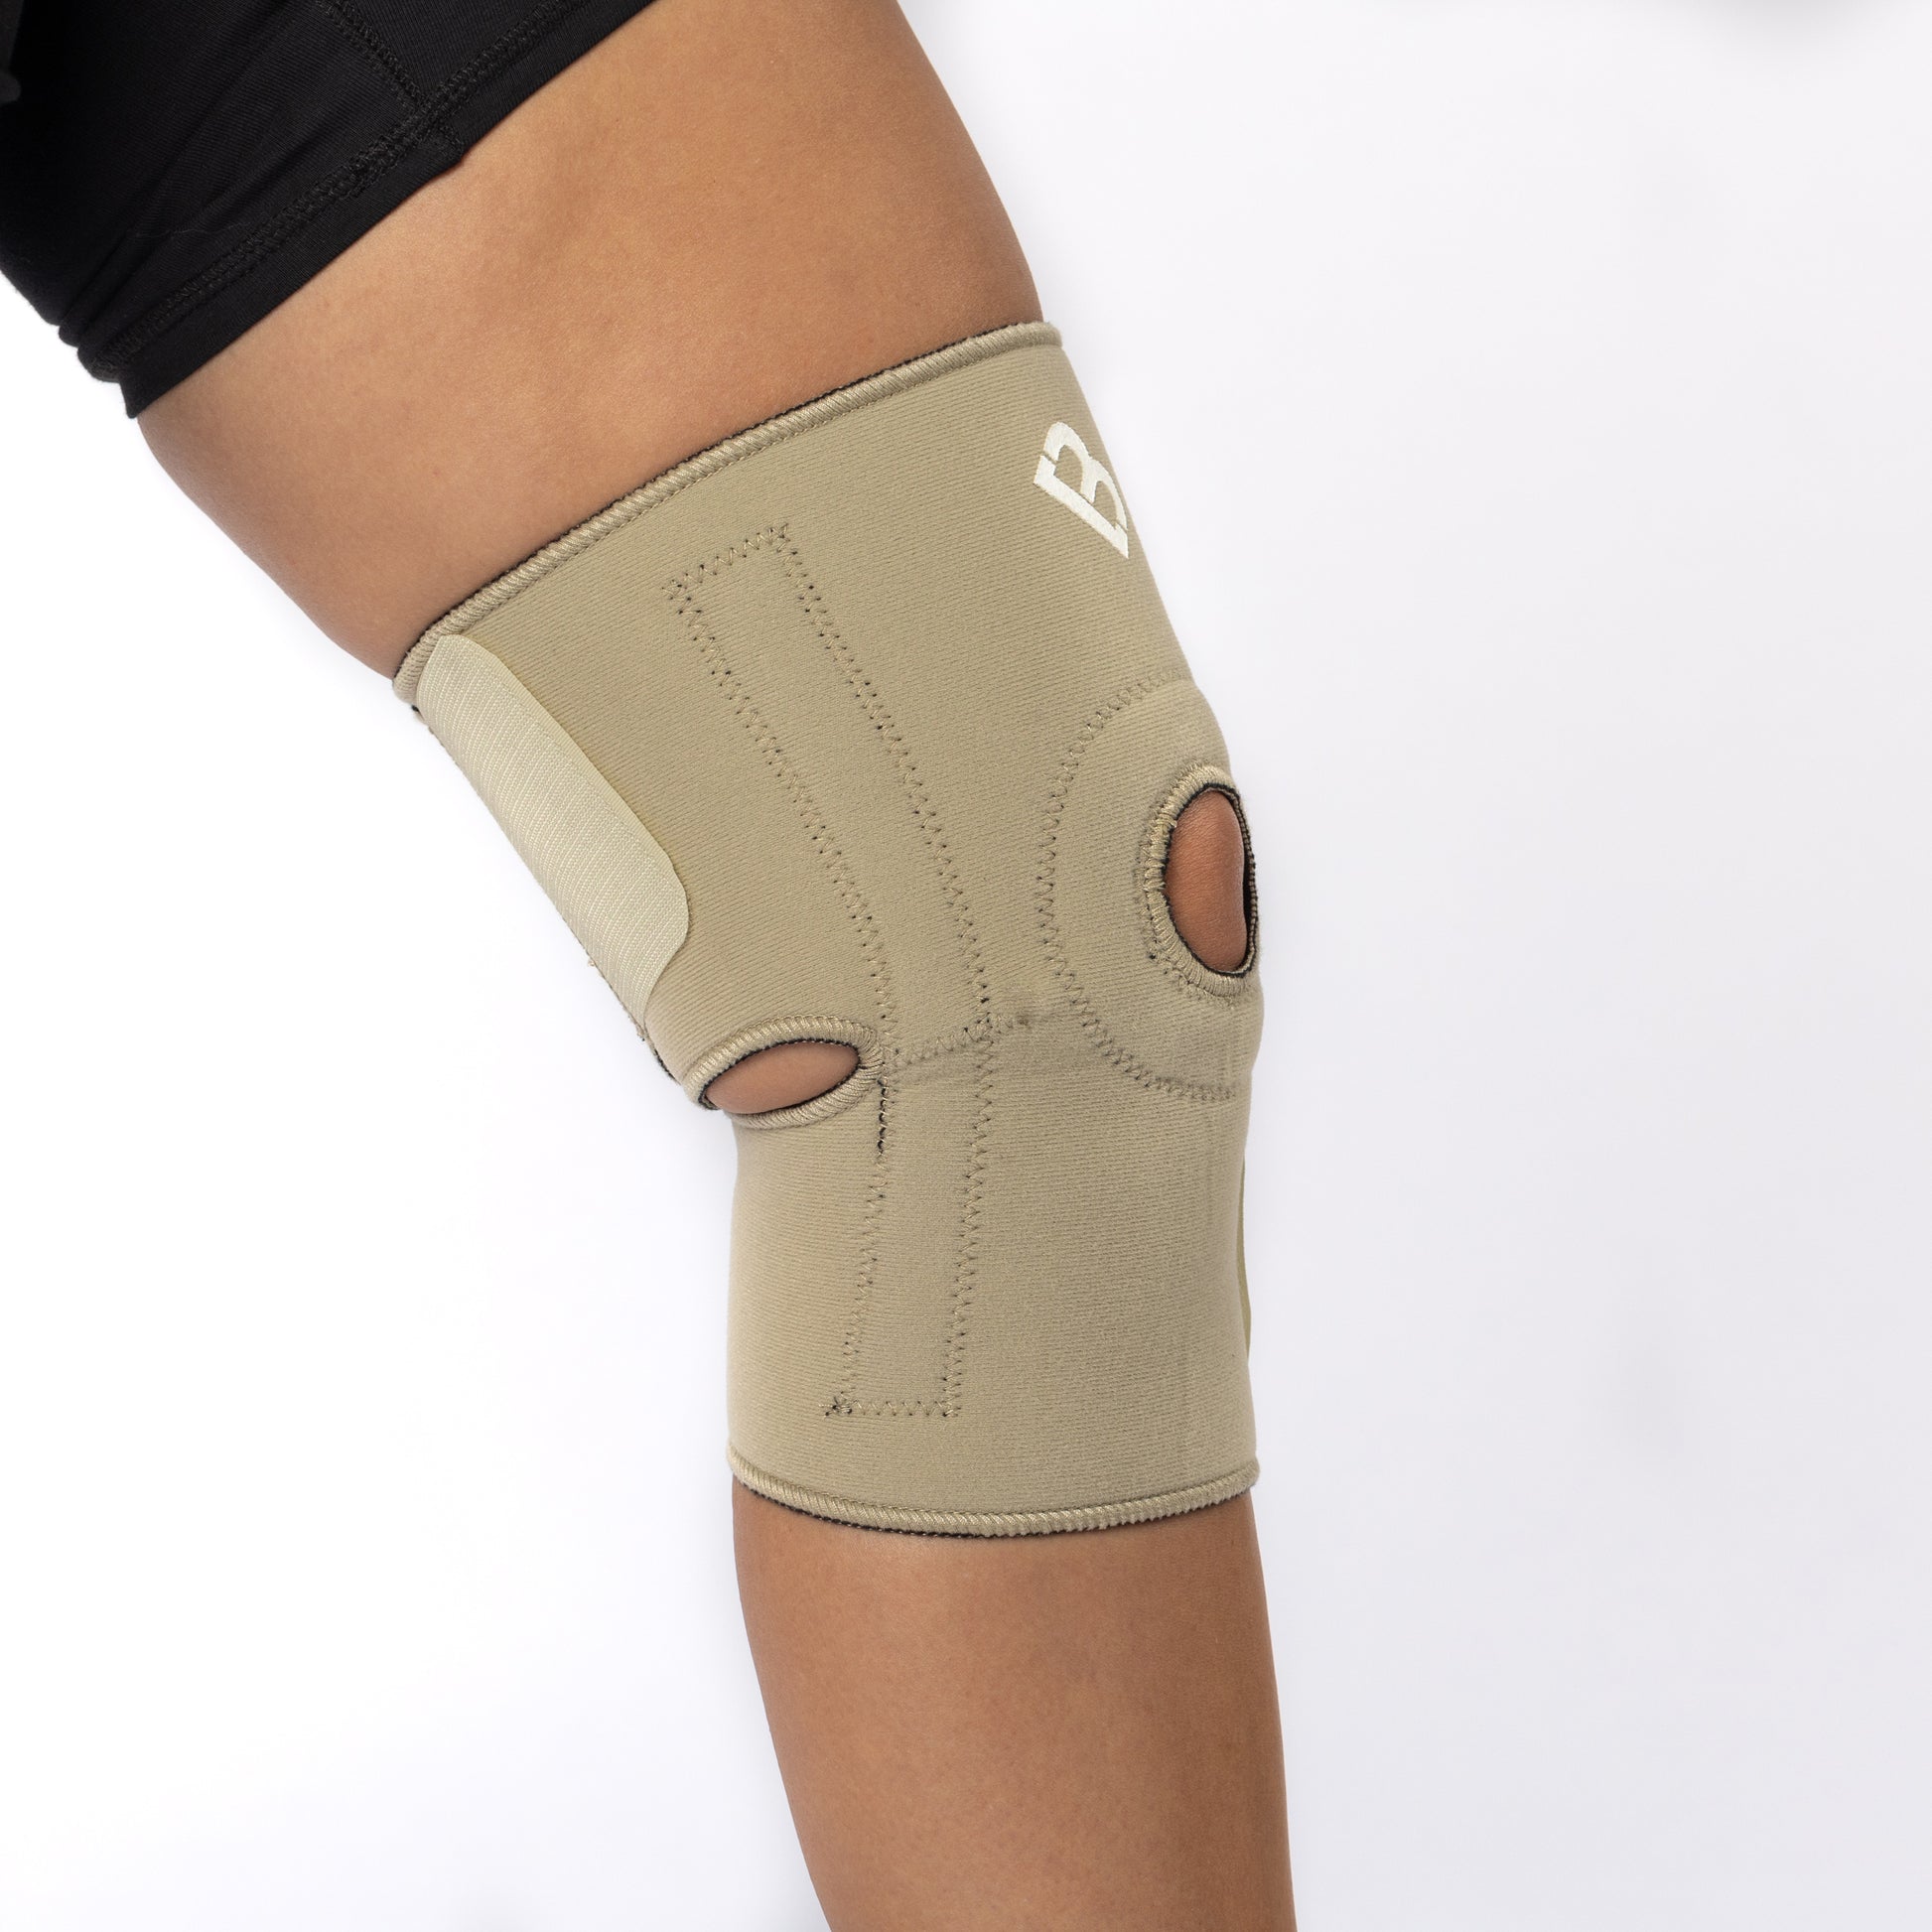 The Bio Magnetic Knee Support in beige being worn by a woman and it is viewed from the side, showing how the back straps attach around the leg for a secure fit.